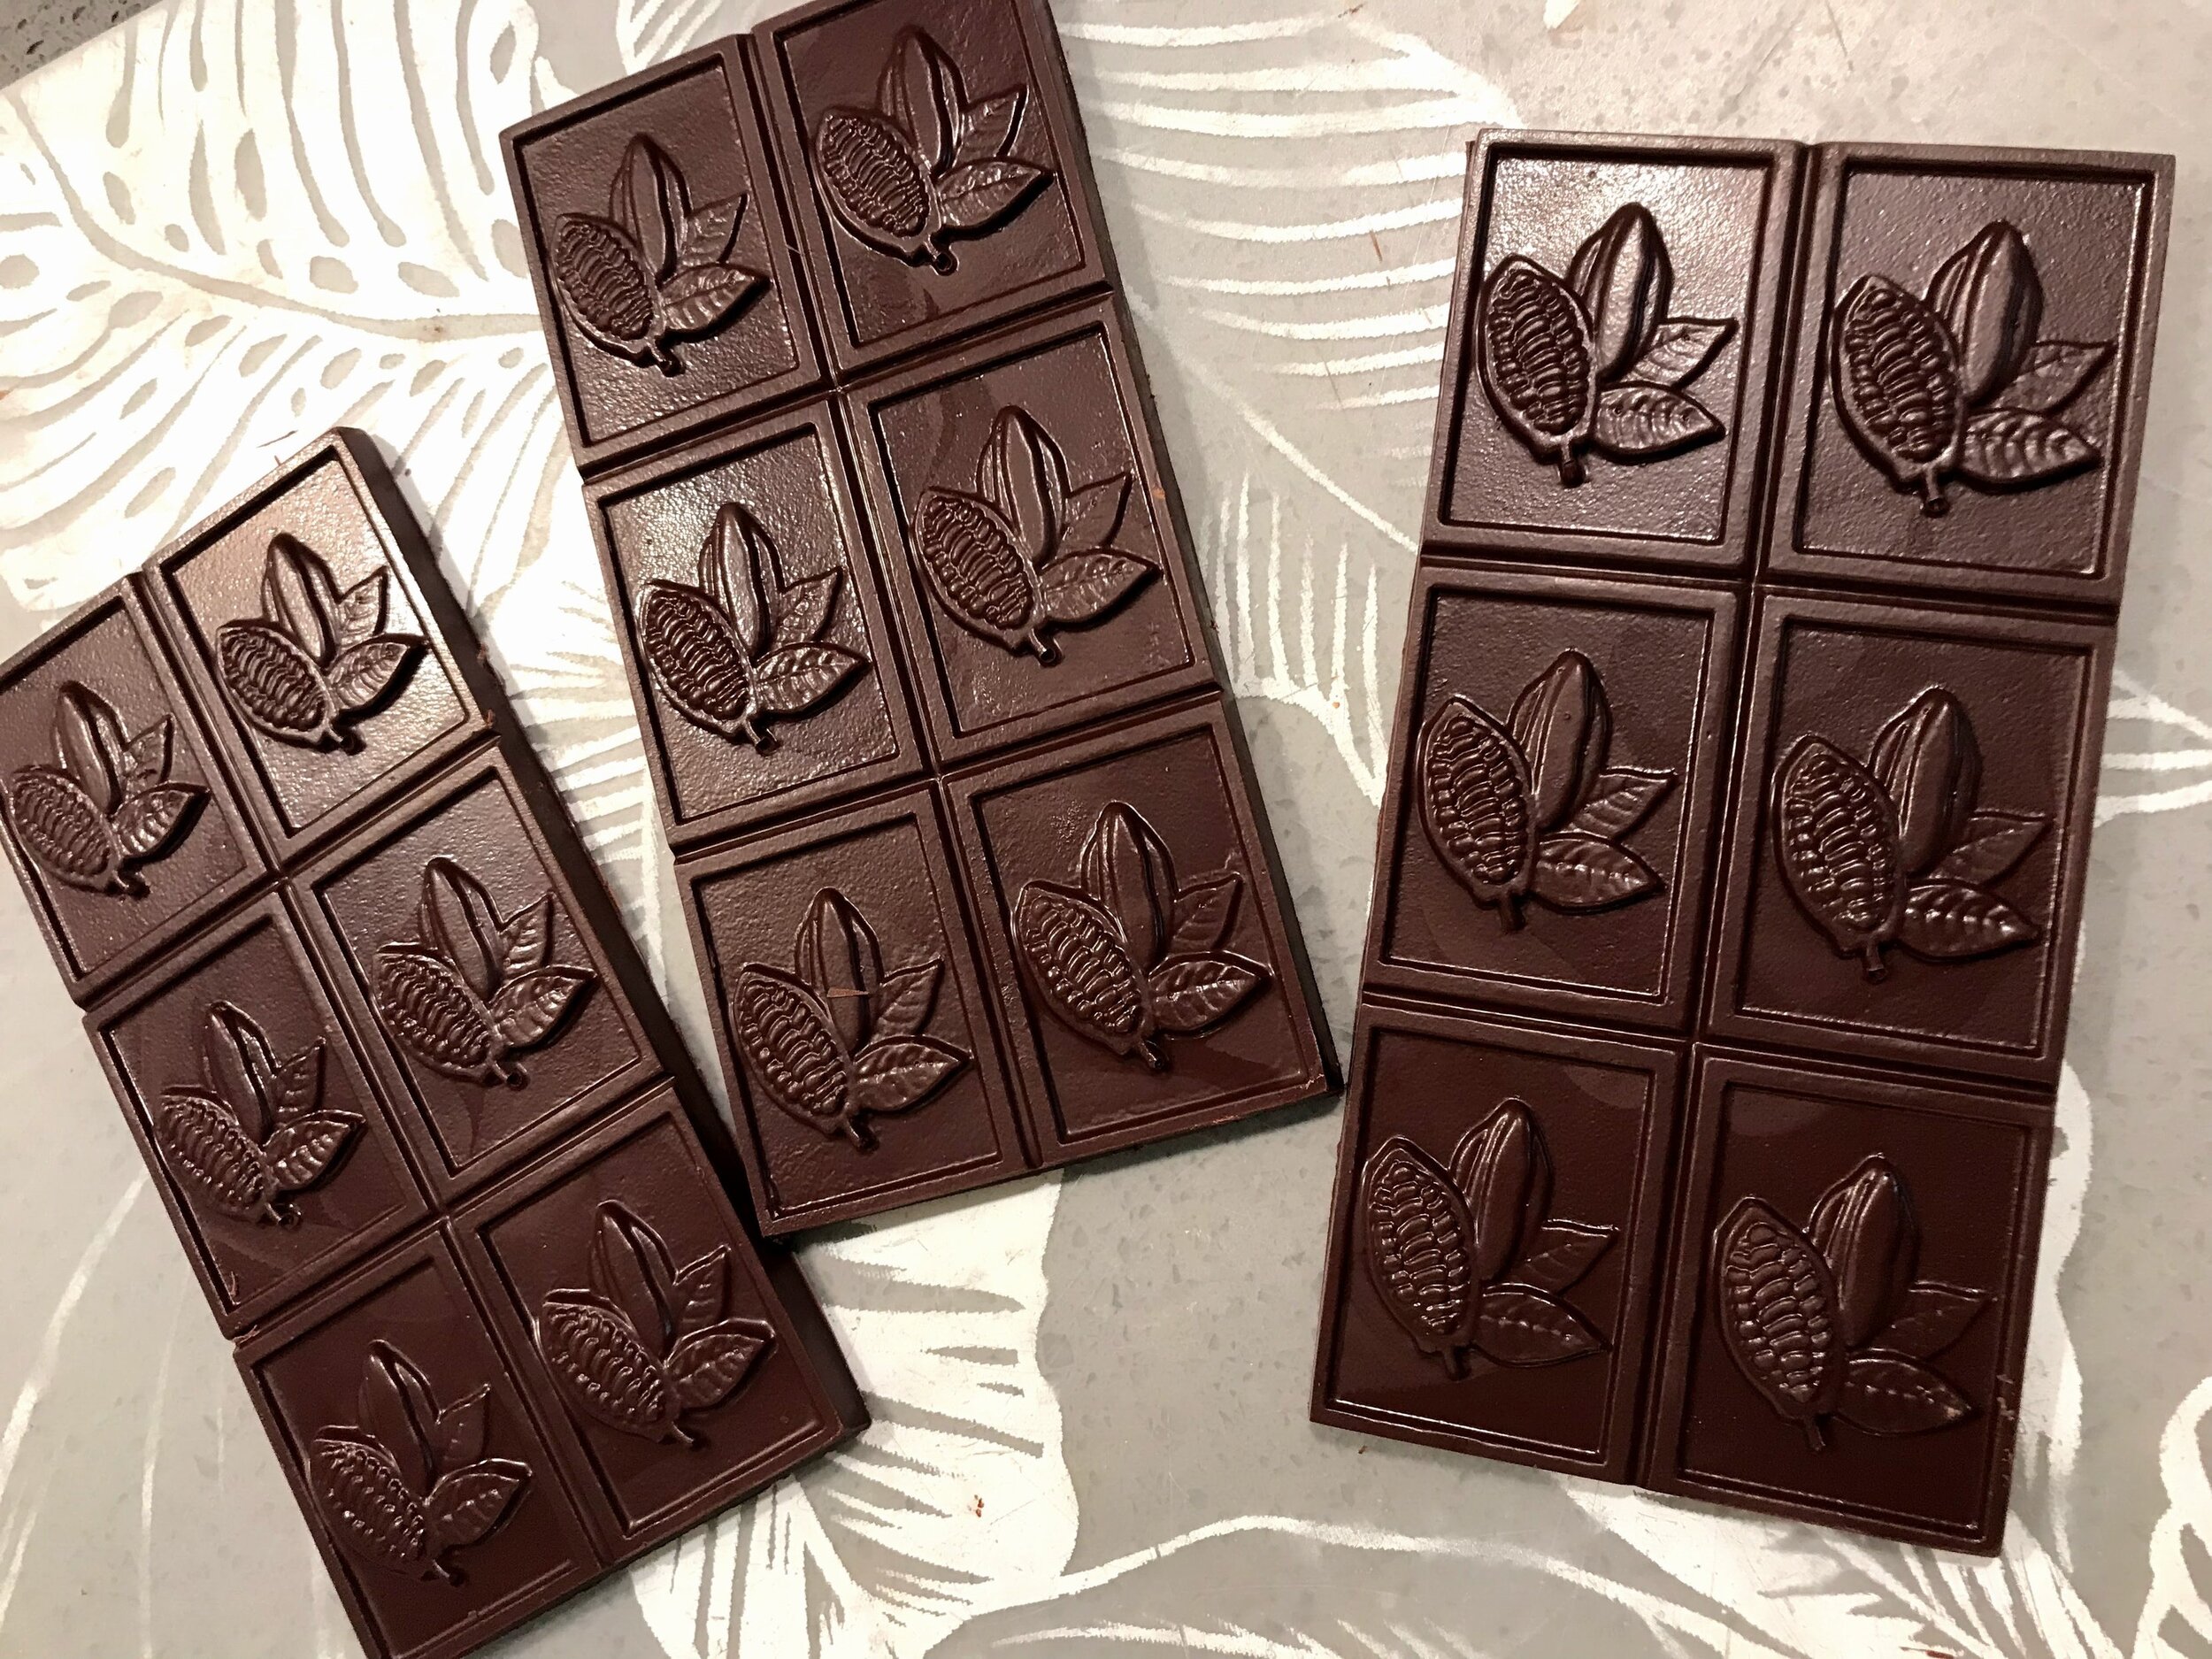 From bean to bar: Marou makes pure unadulterated chocolate - The Manual